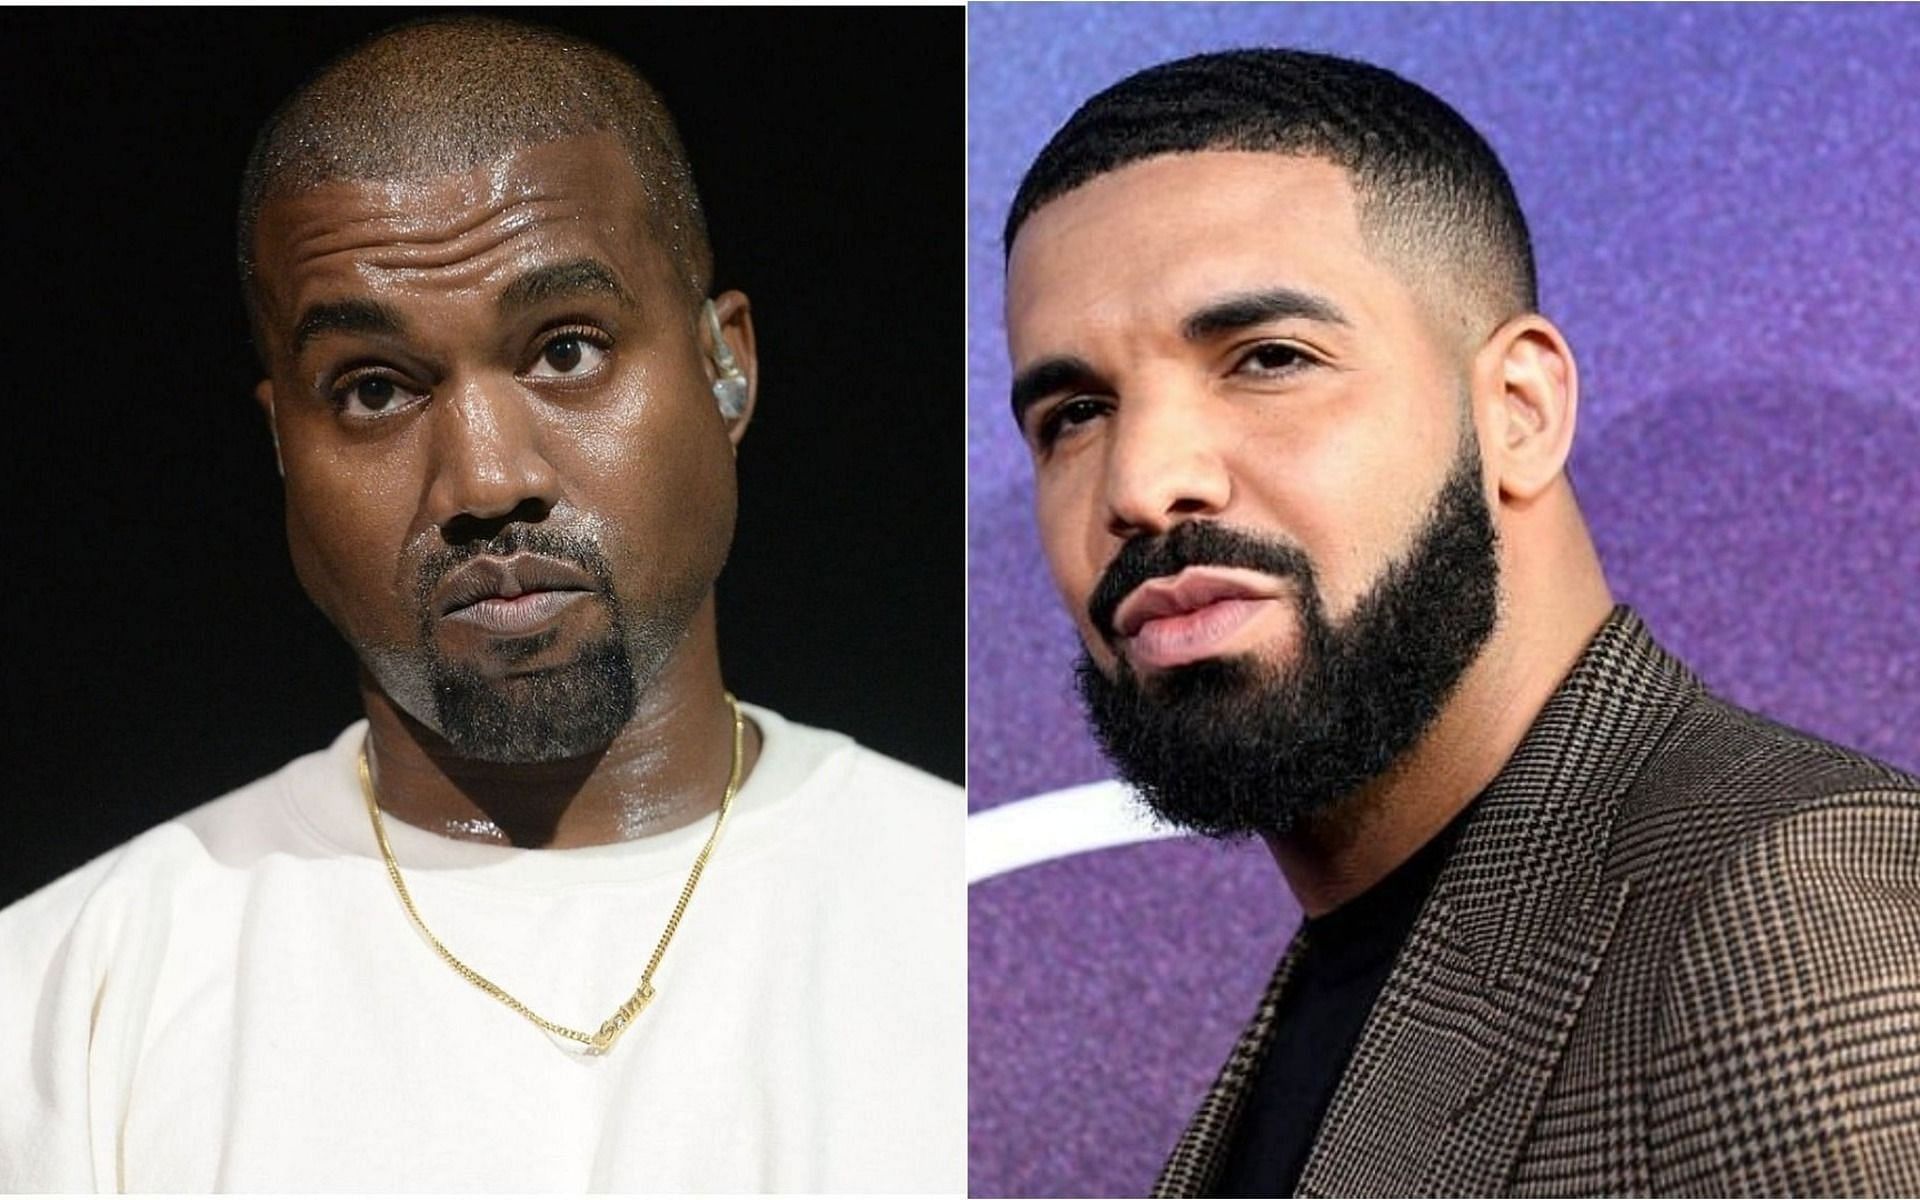 Where to watch Kanye West and Drake's 'Free Larry Hoover' concert ...